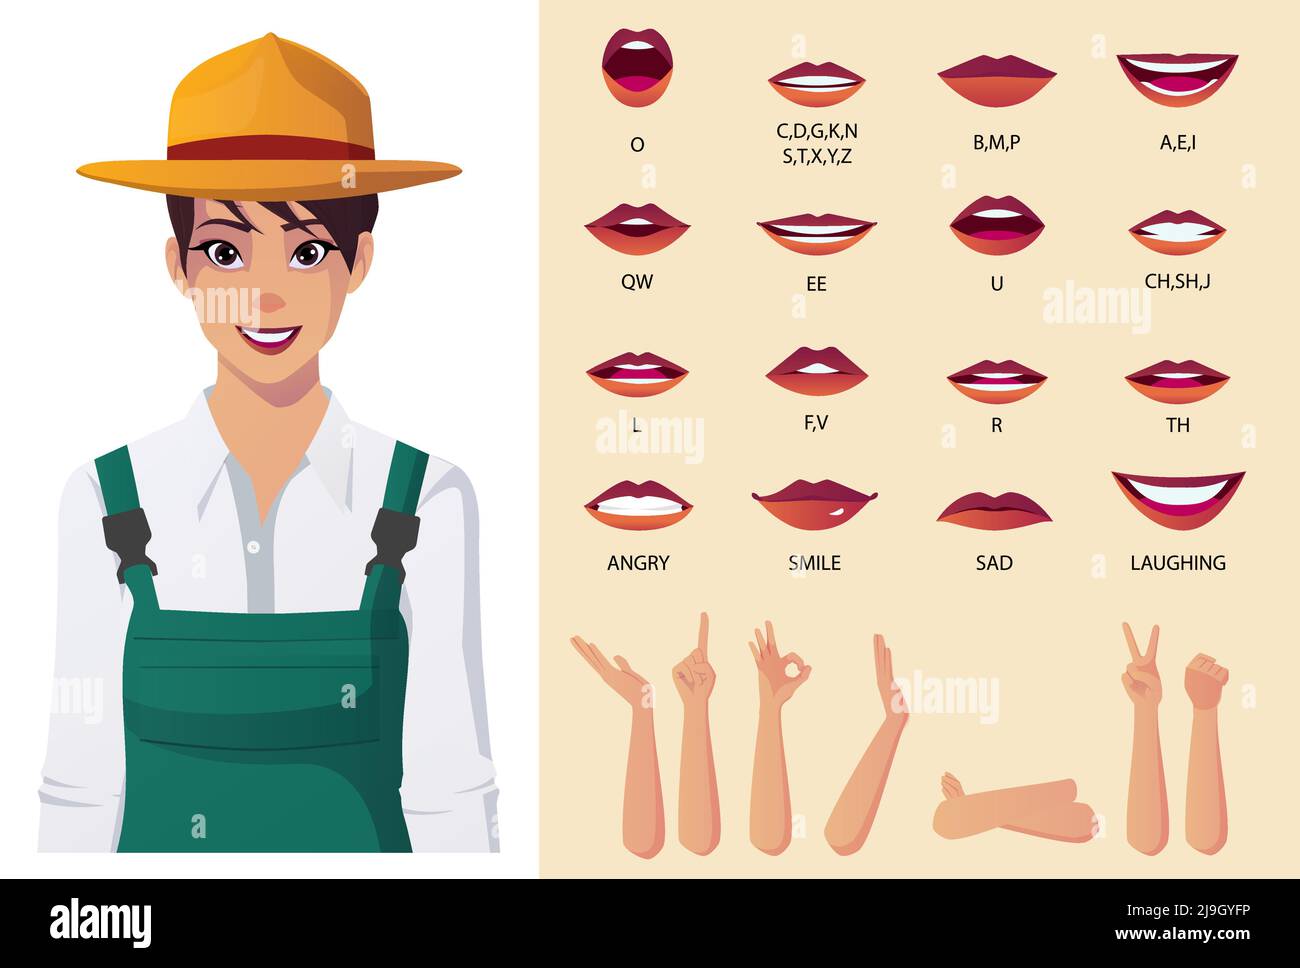 Female Farmer Character with Lips Sync, Face Animation, Emotions and some Hand Gestures Stock Vector